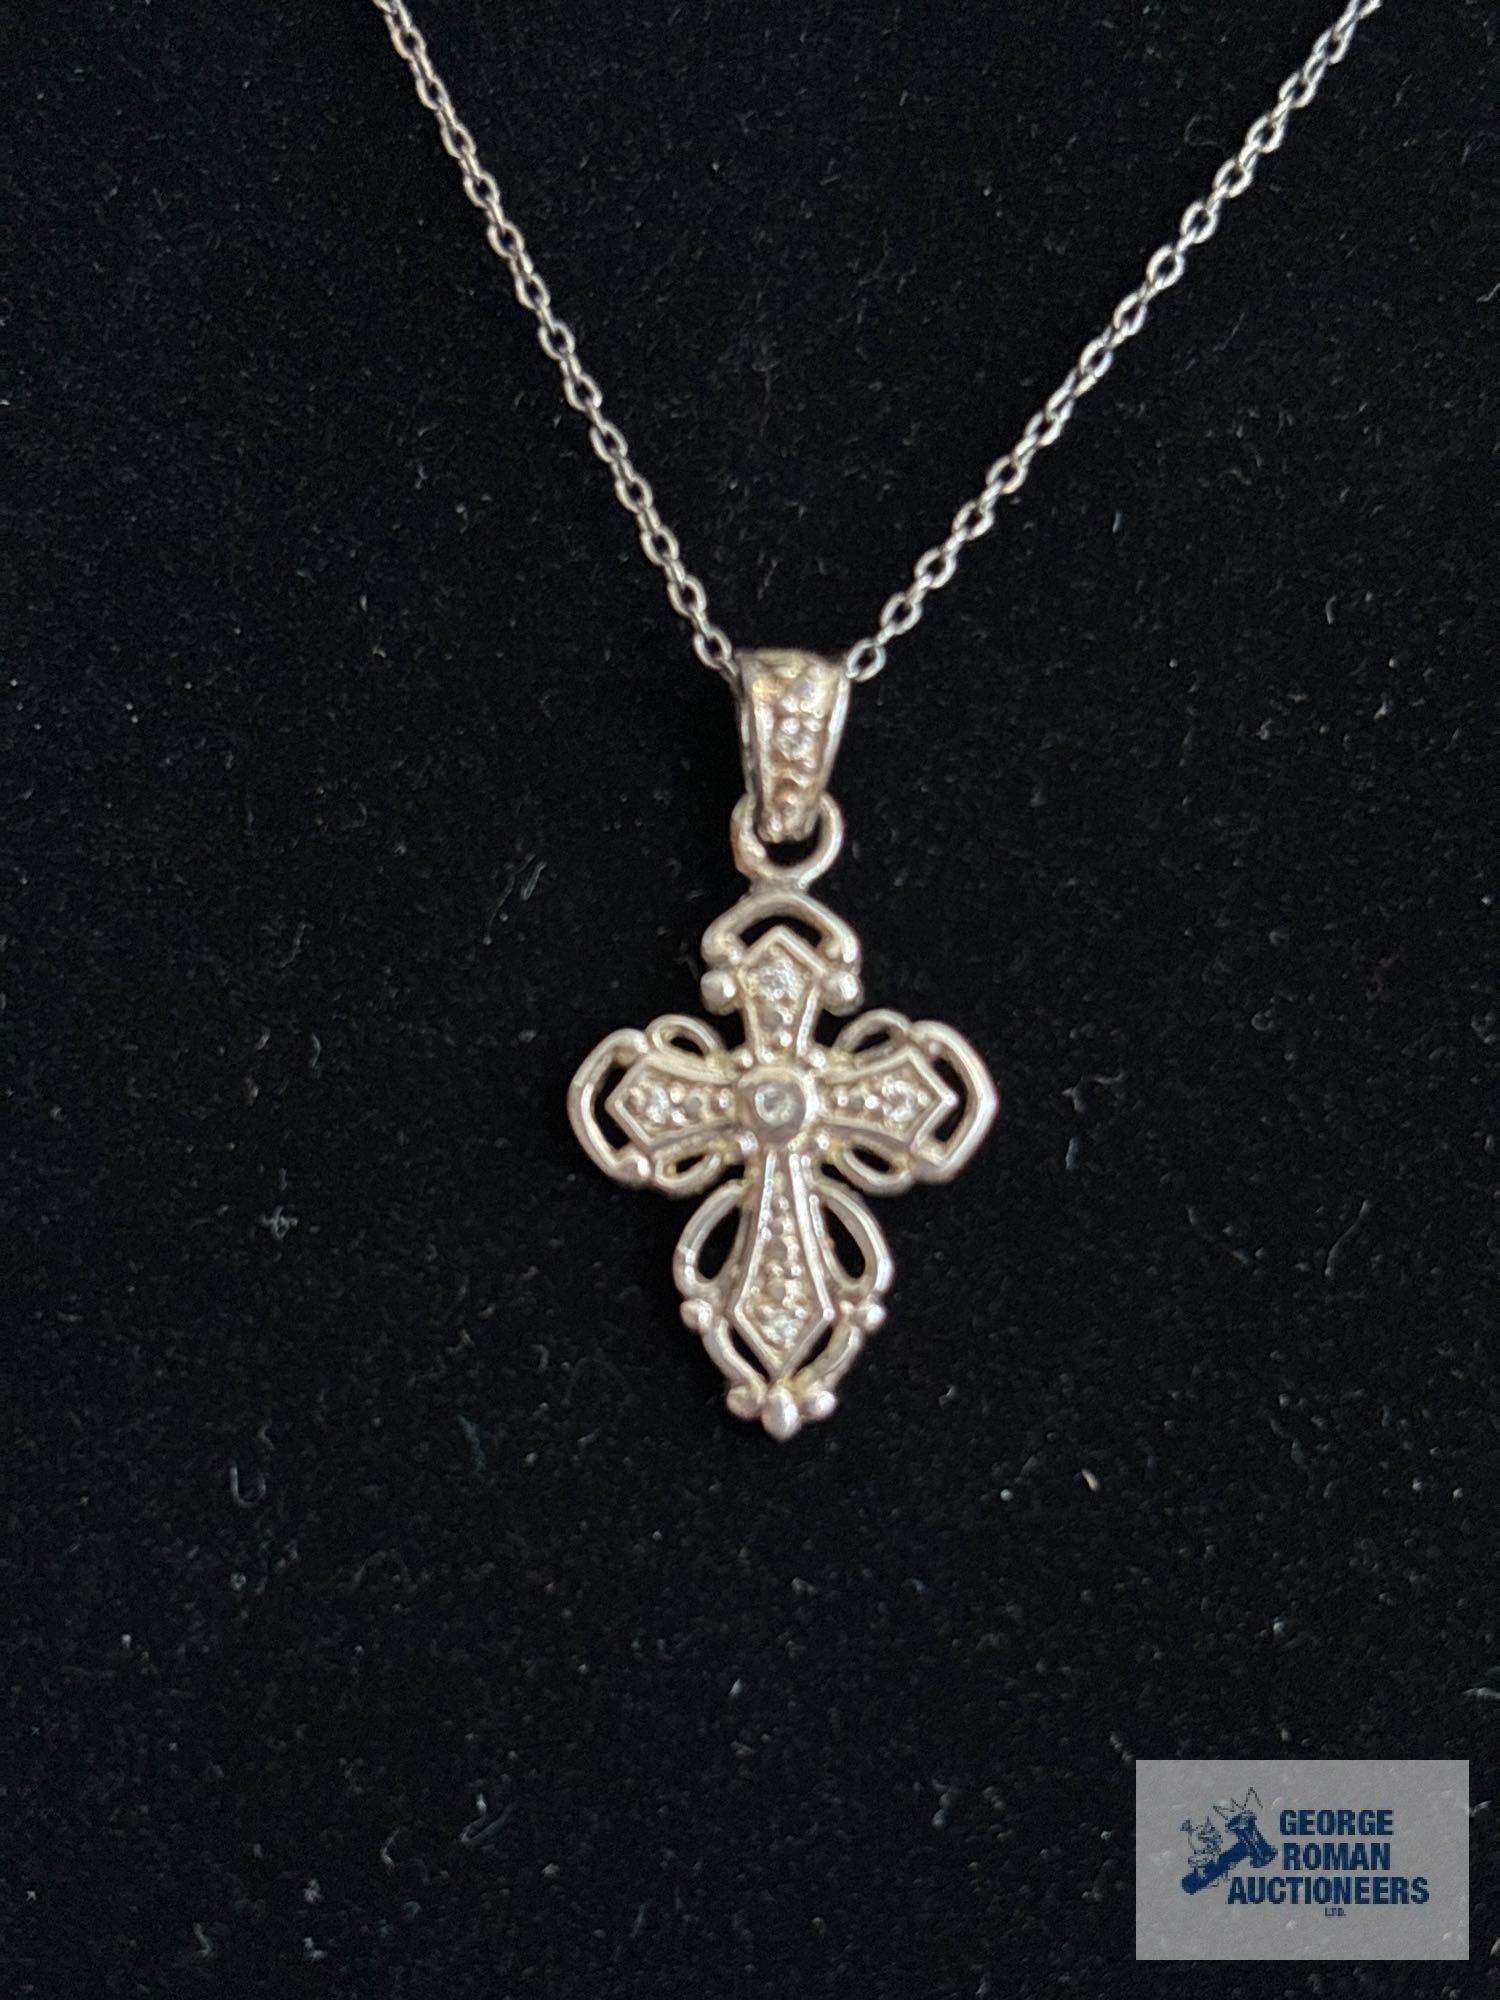 Silver colored cross pendant with clear gemstone chips, marked 925, on silver colored chain, marked